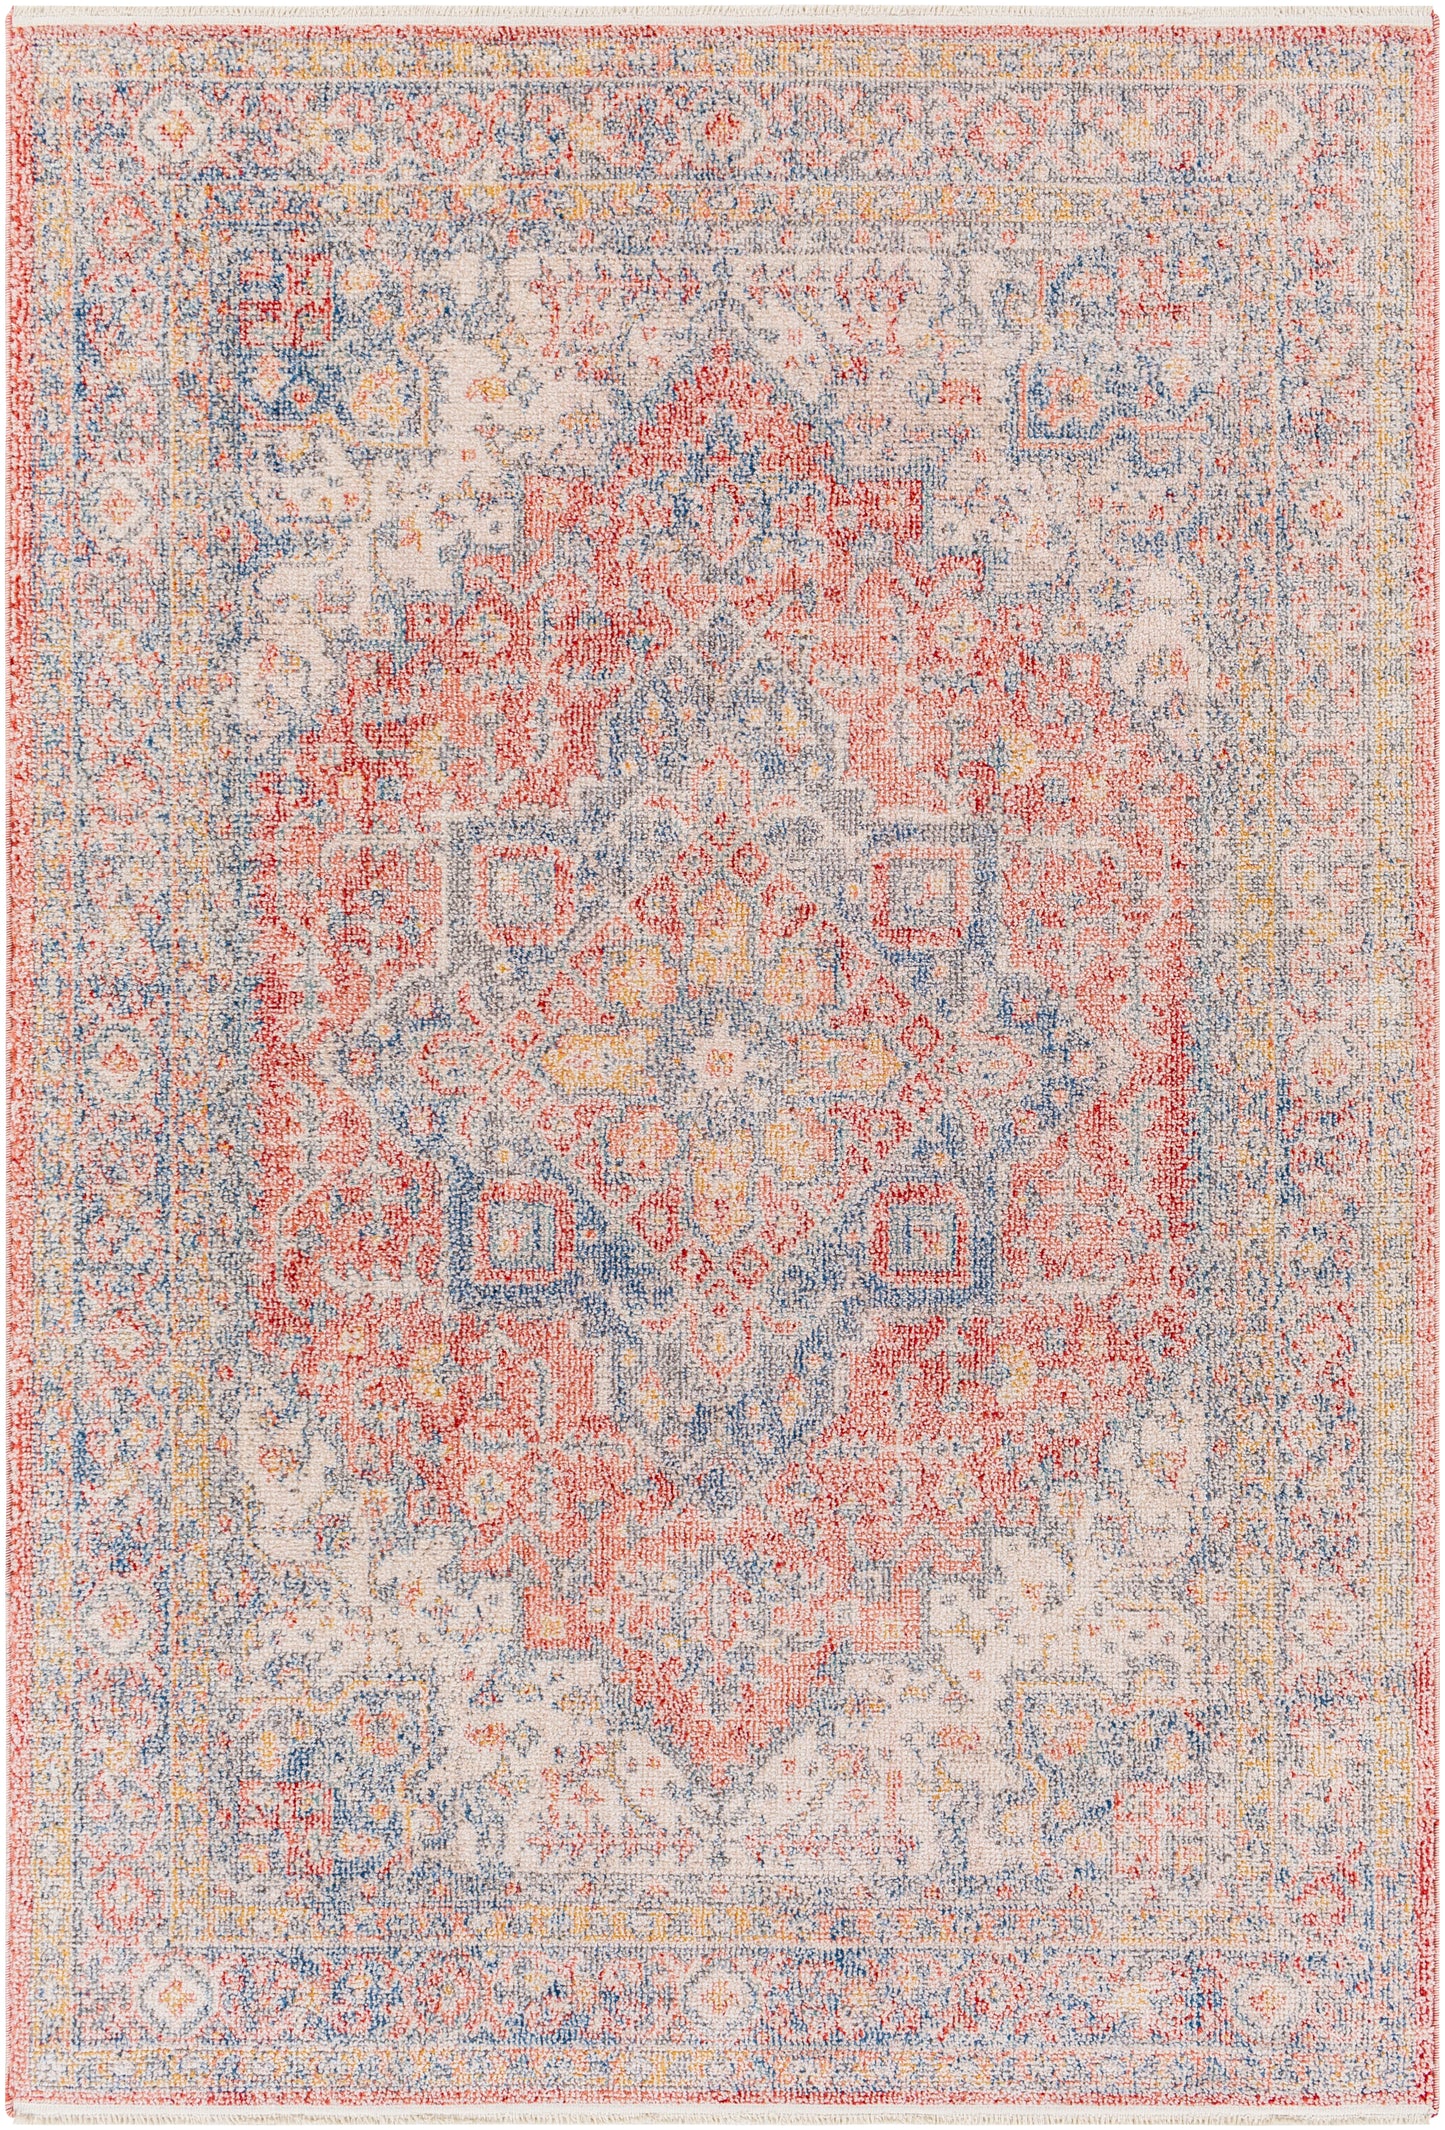 Subtle 30717 Machine Woven Synthetic Blend Indoor Area Rug by Surya Rugs